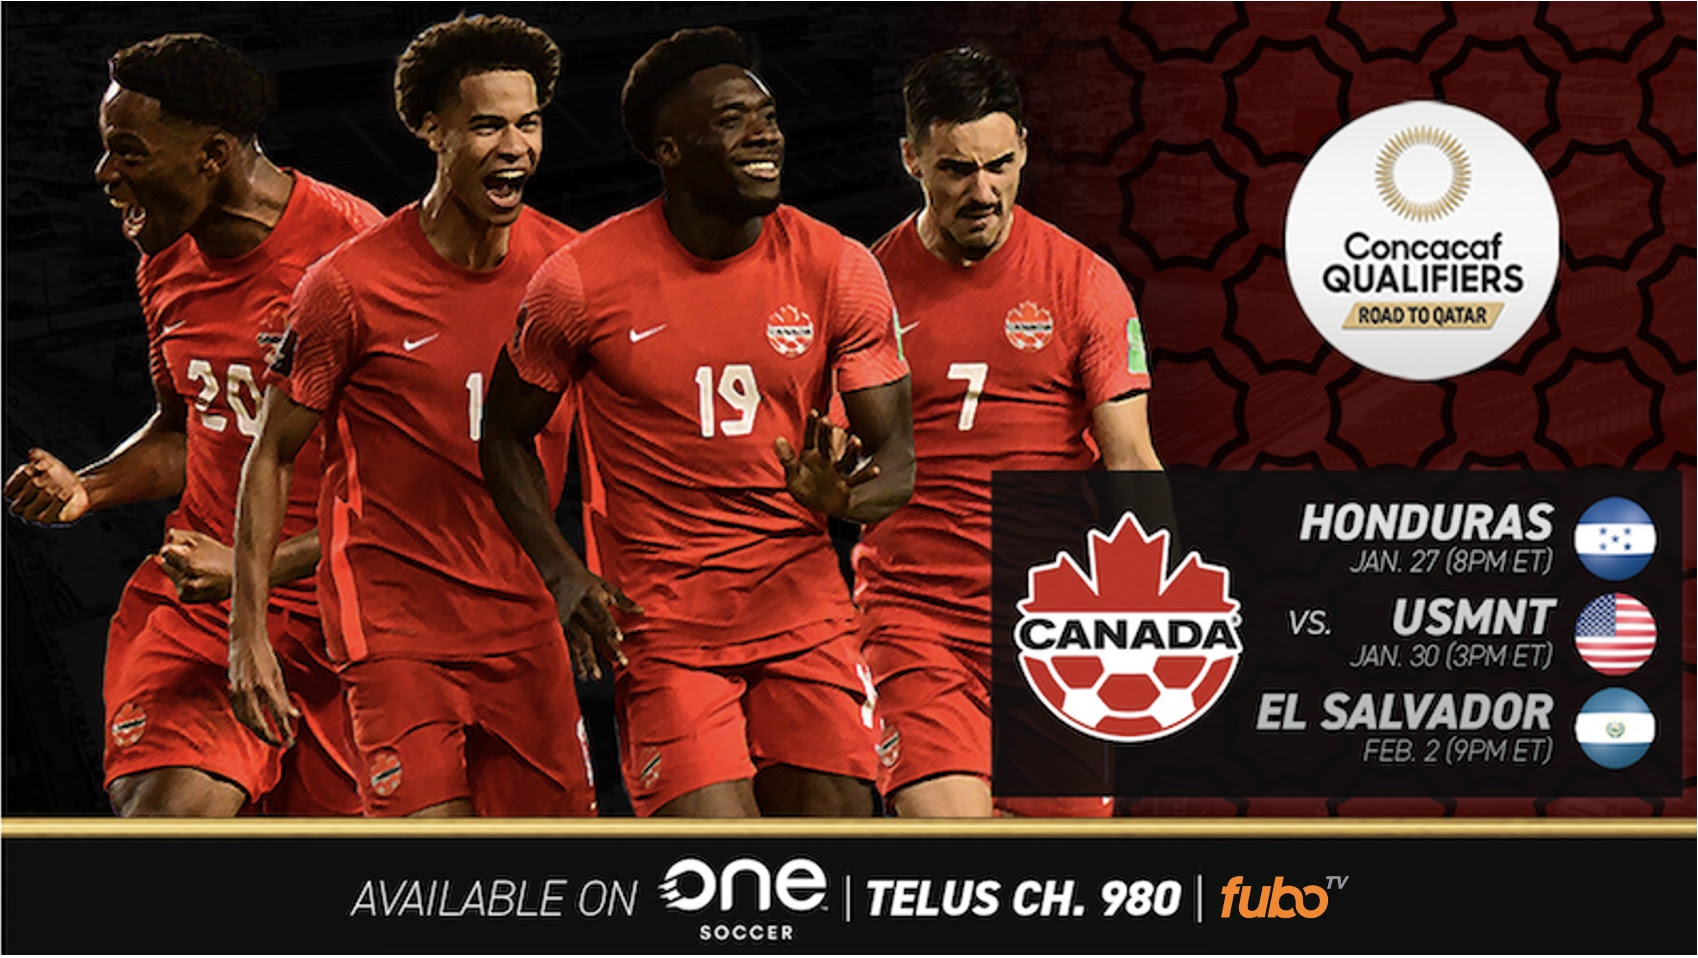 Mediapro Canada Gets Set for USA-Canada in FIFA World Cup Qualifying on OneSoccer